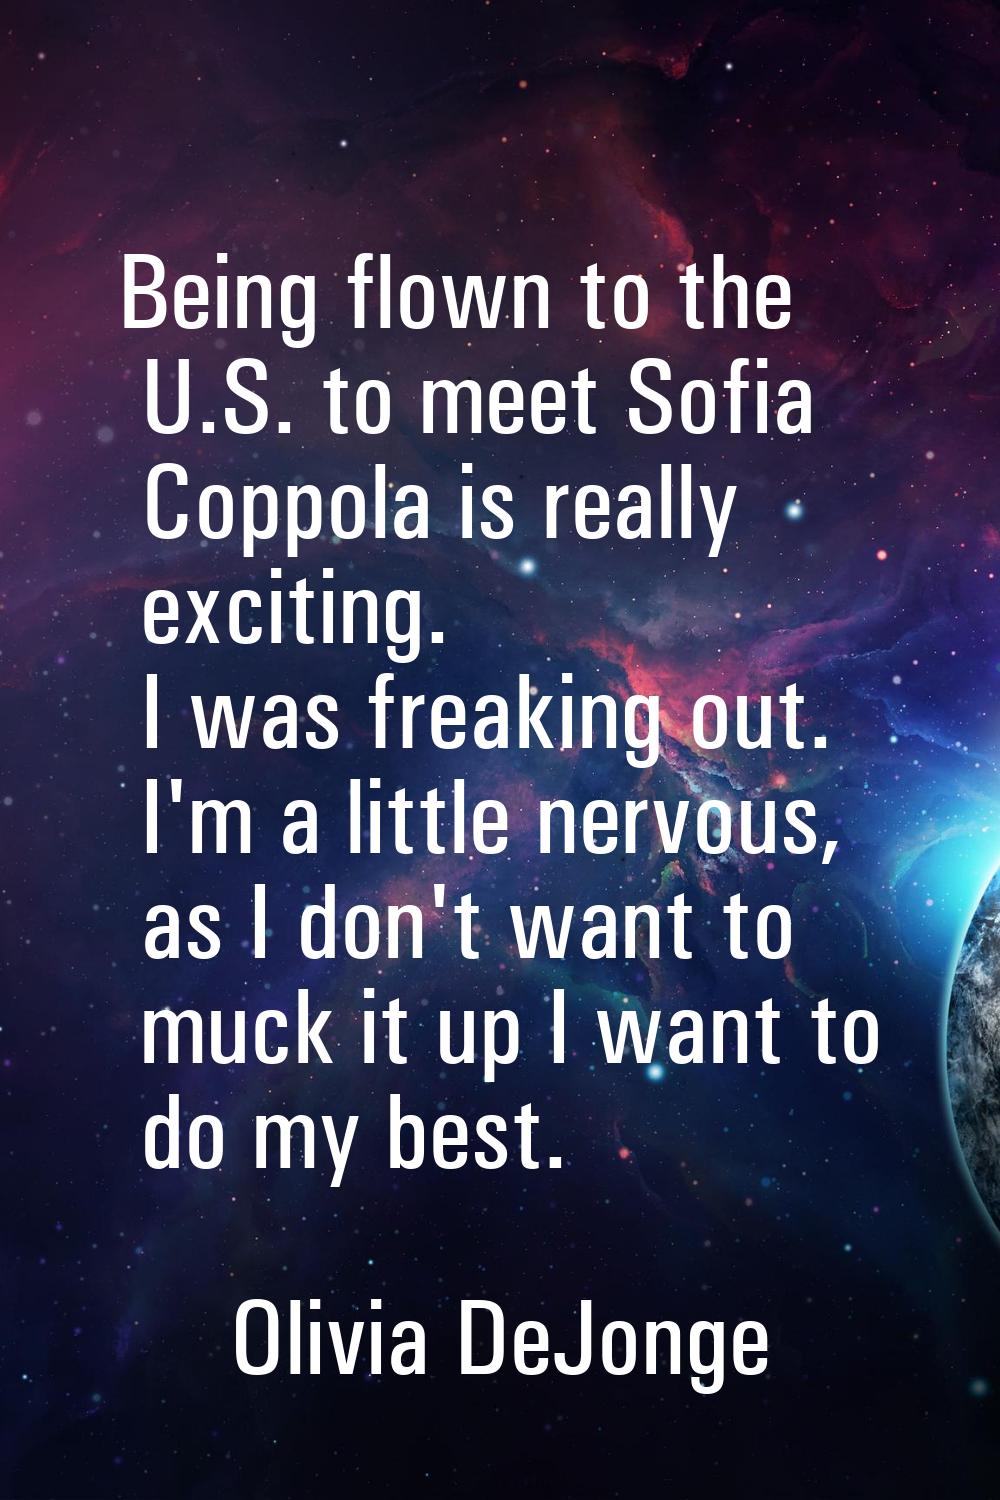 Being flown to the U.S. to meet Sofia Coppola is really exciting. I was freaking out. I'm a little 